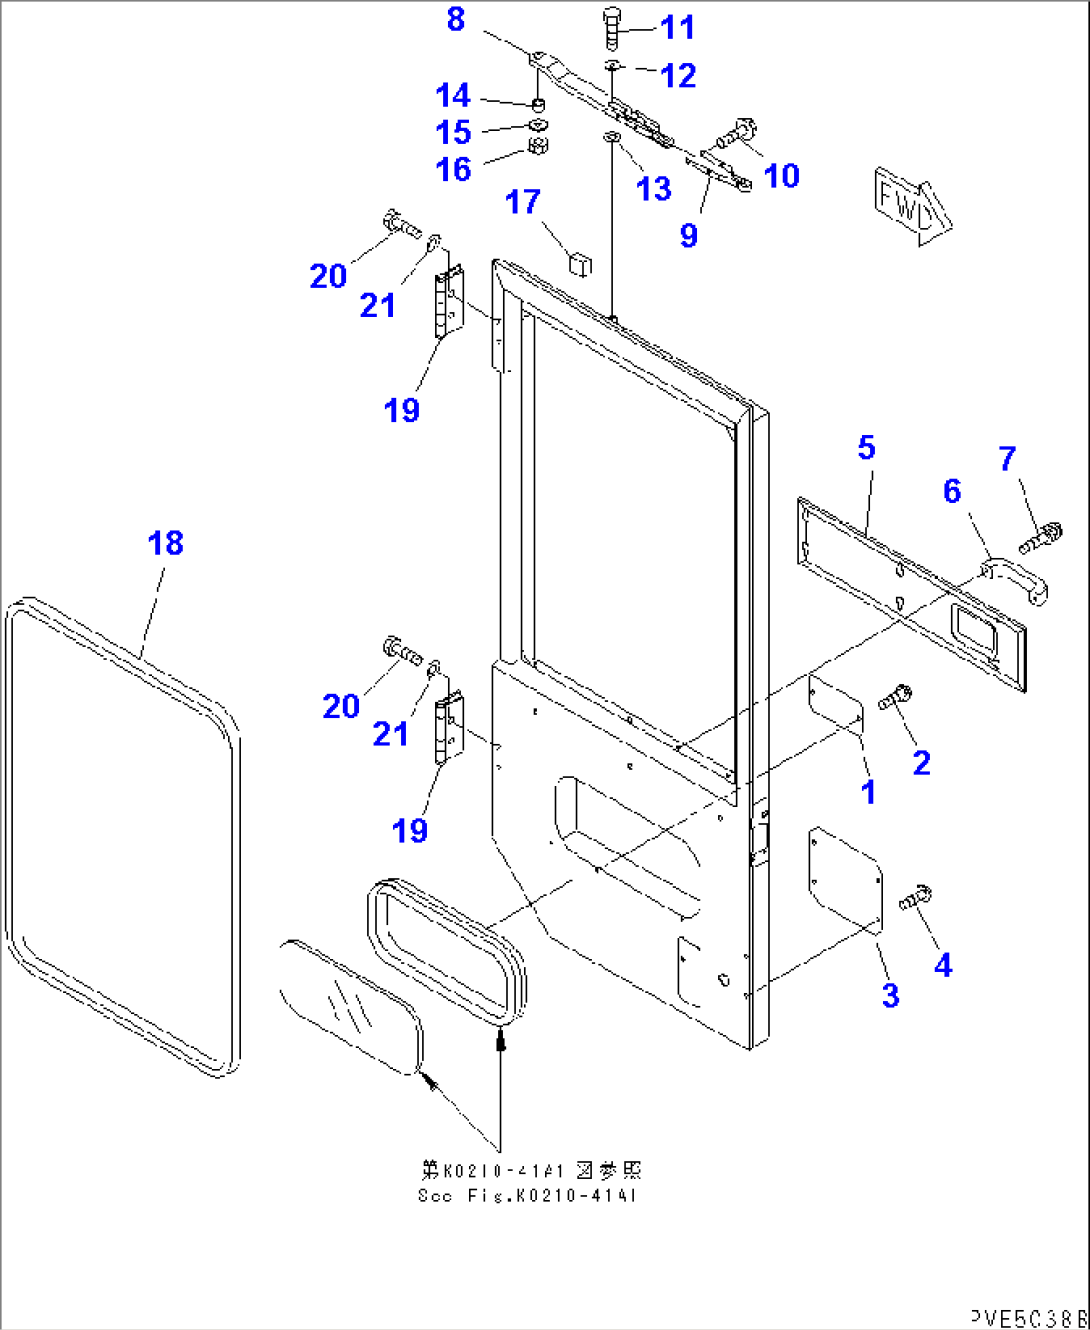 2-PERSONS CAB (DOOR RELATED PARTS R.H.)(#63001-64000)